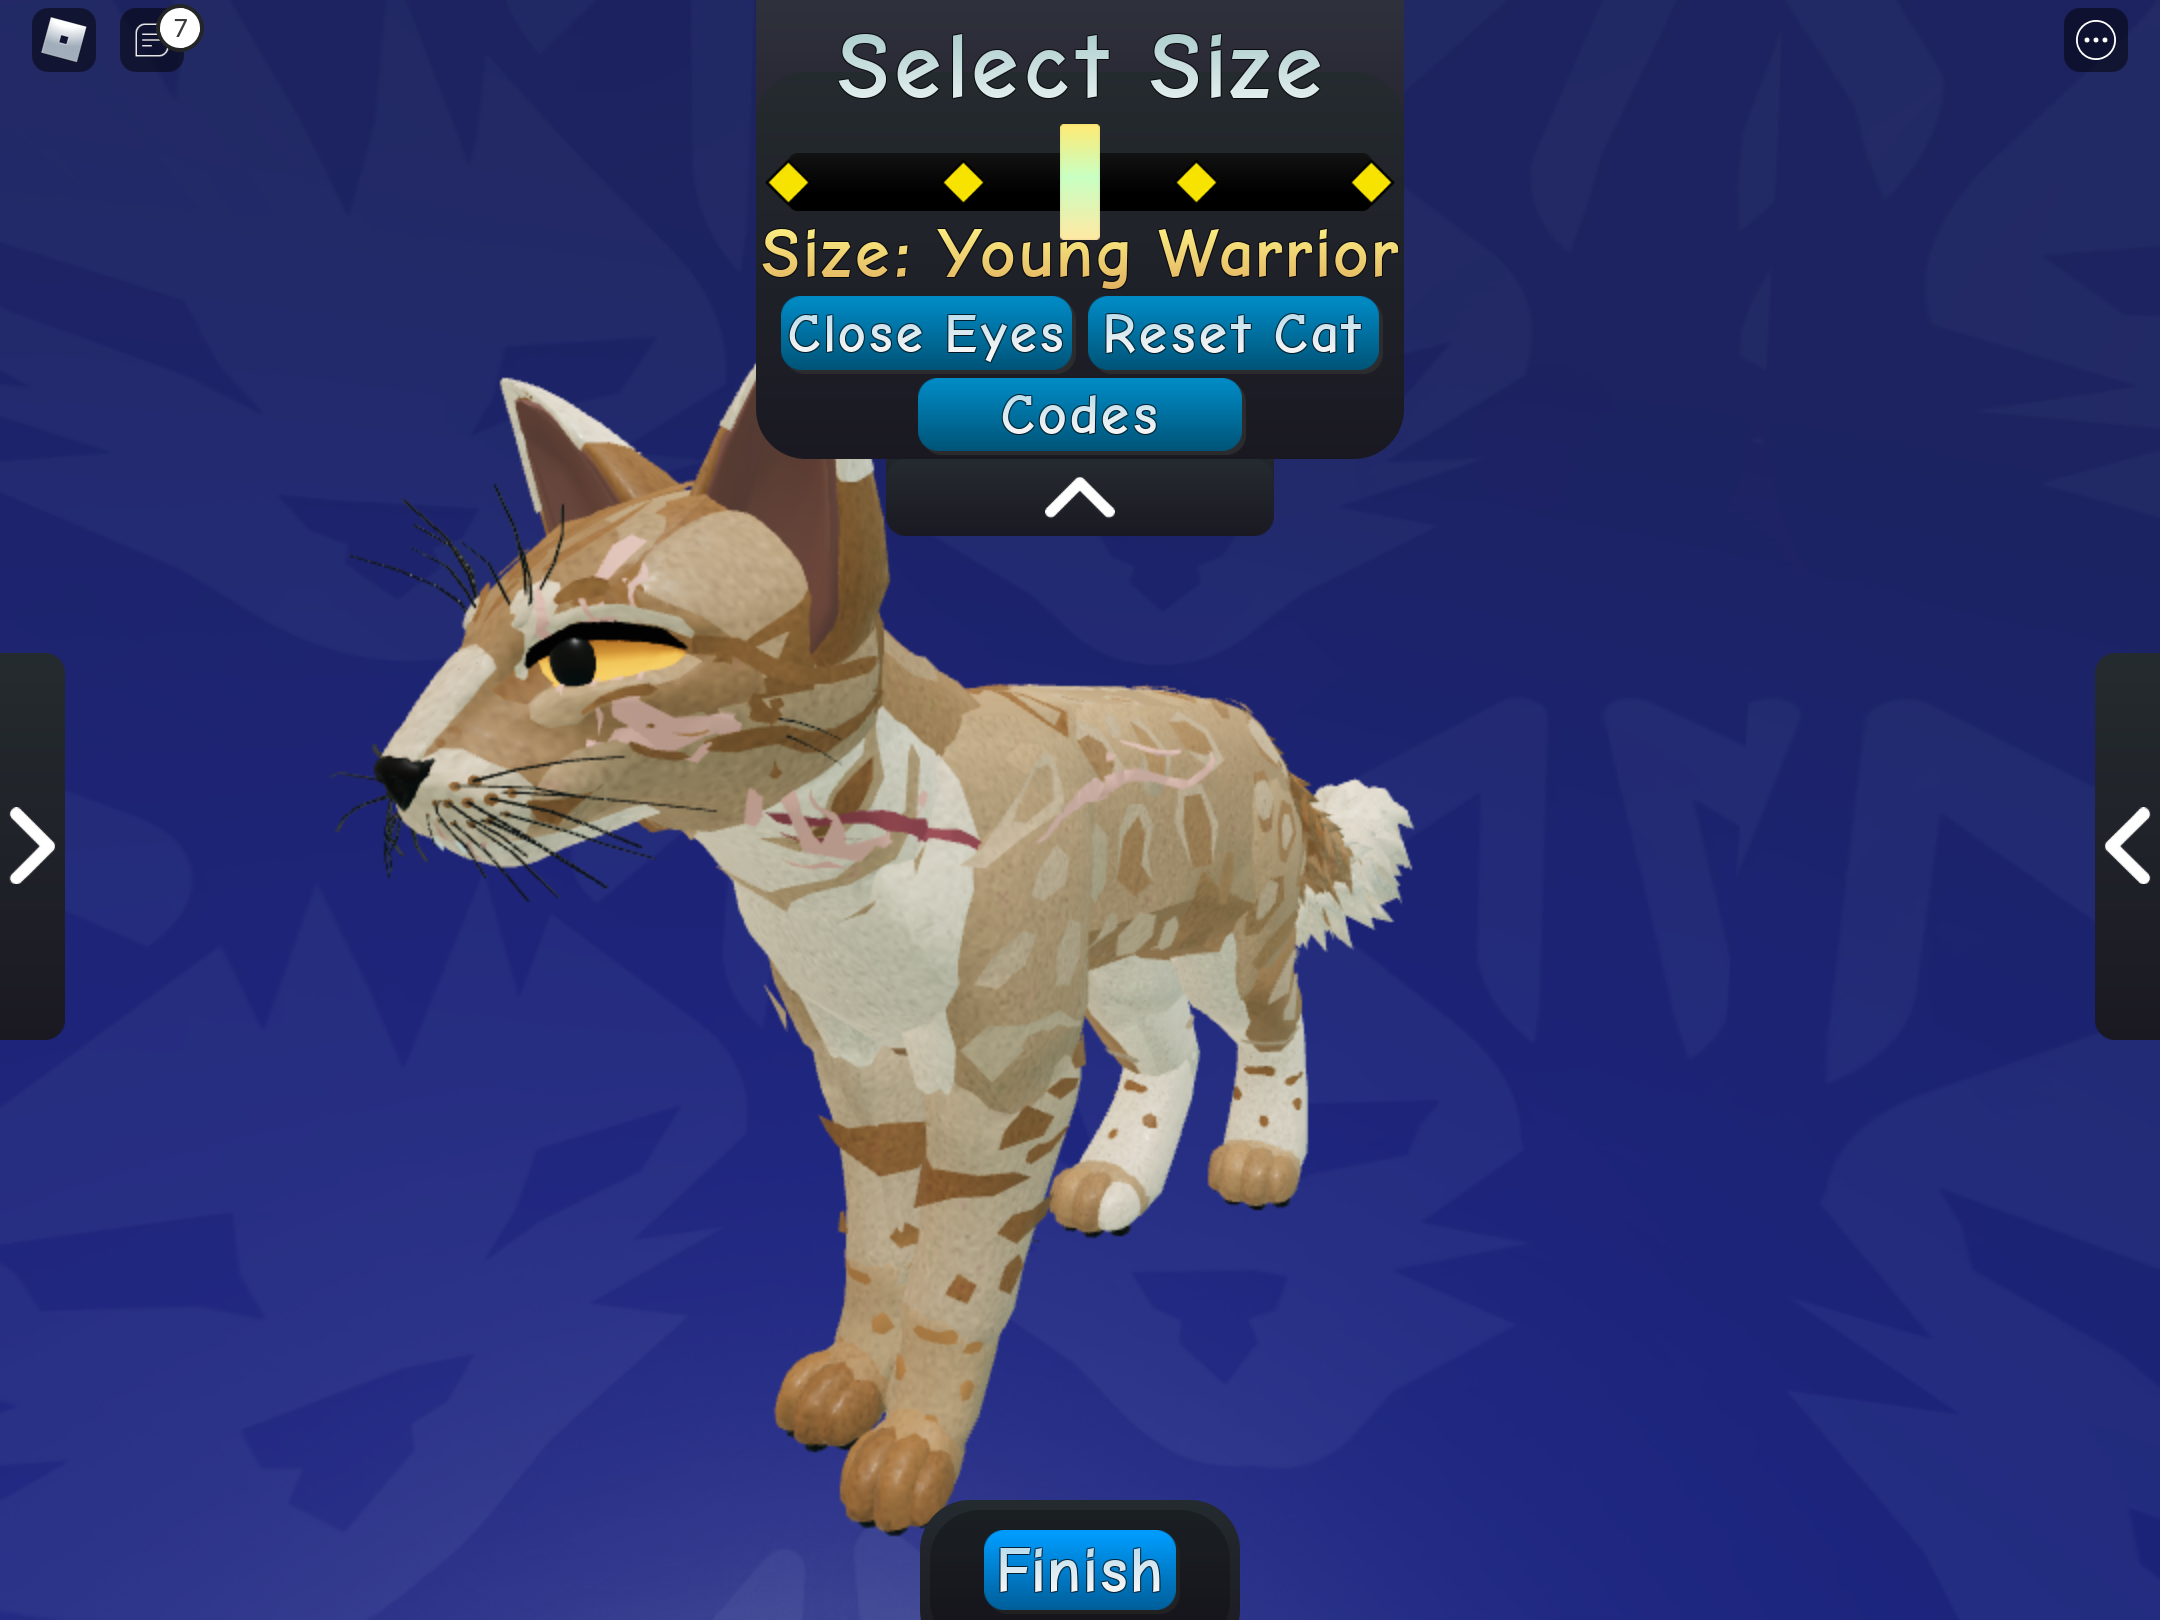 All New* Warrior Cats Codes Roblox 2022 - Roblox Warrior Cats Codes - Warrior  Cats Ultimate Edition 